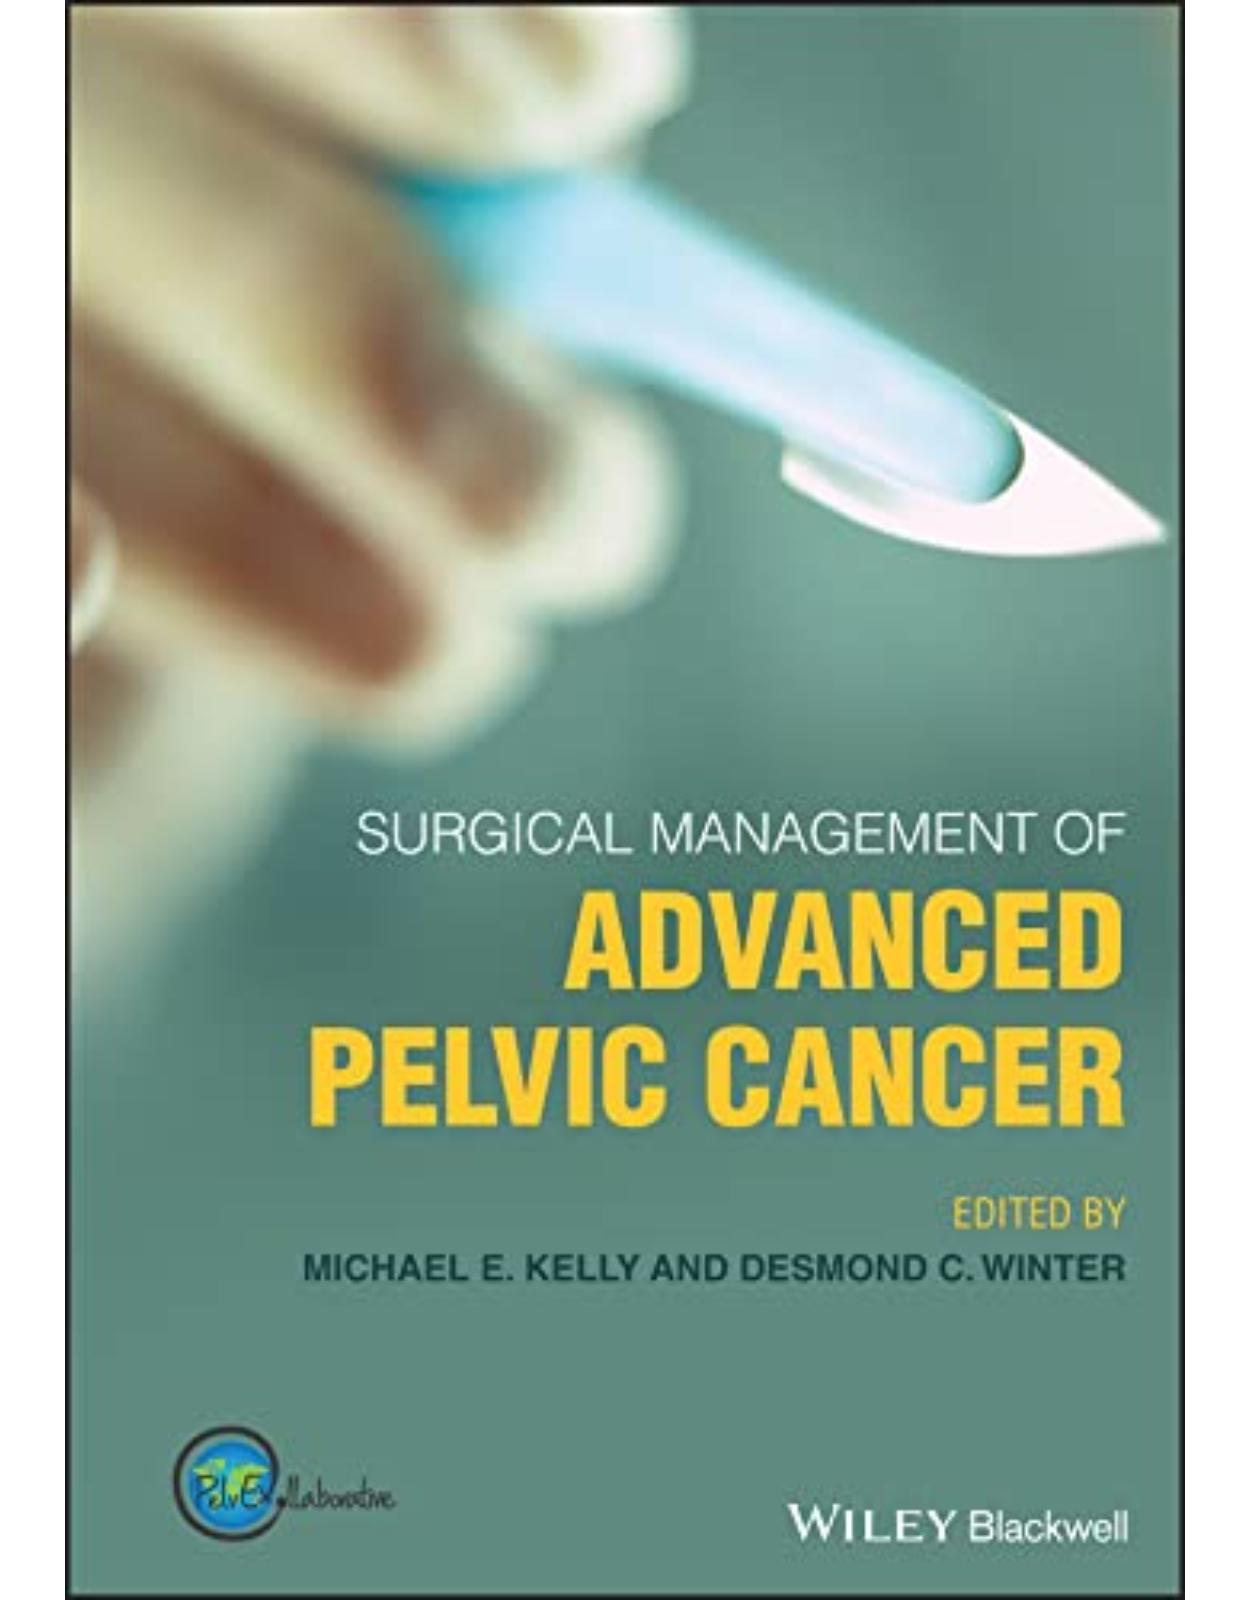 Surgical Management of Advanced Pelvic Cancer